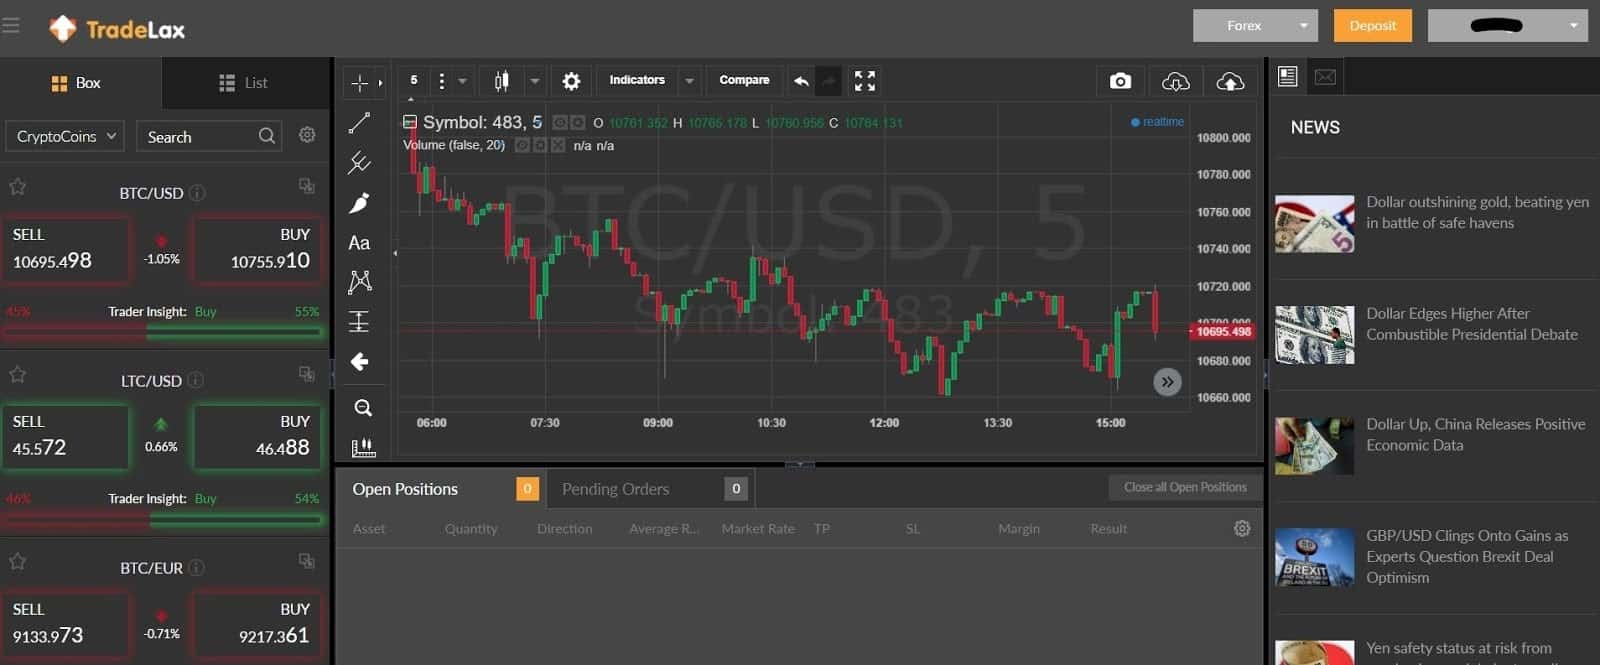 TradeLax Review: Cryptocurrency Trading and Traditional Markets at One Place